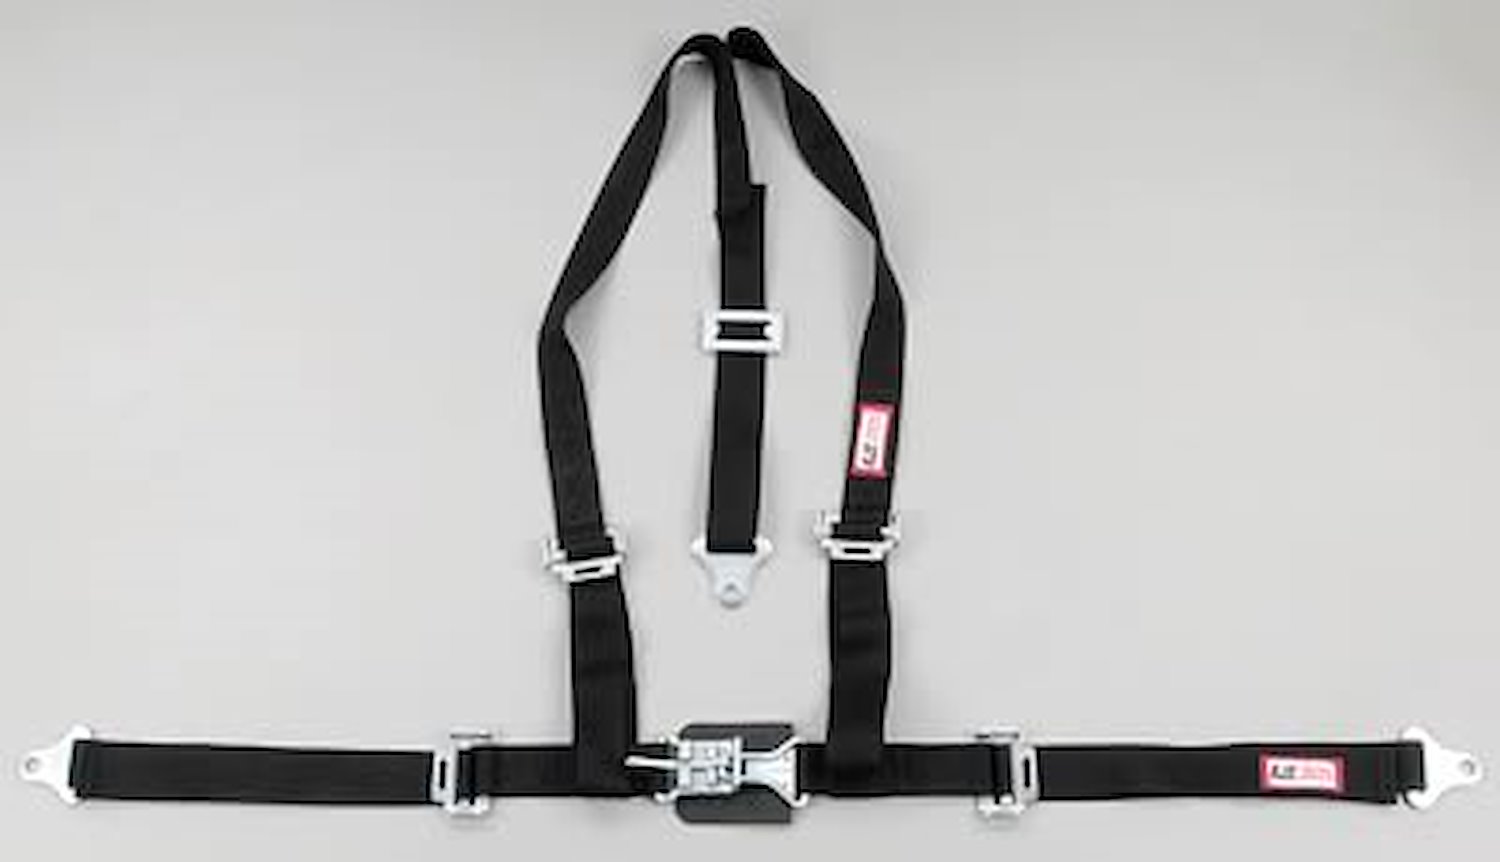 NON-SFI L&L HARNESS 3 PULL UP Lap BELT SNAP SEWN IN 2 S.H. Y FLOOR Mount WRAP/BOLT BLACK